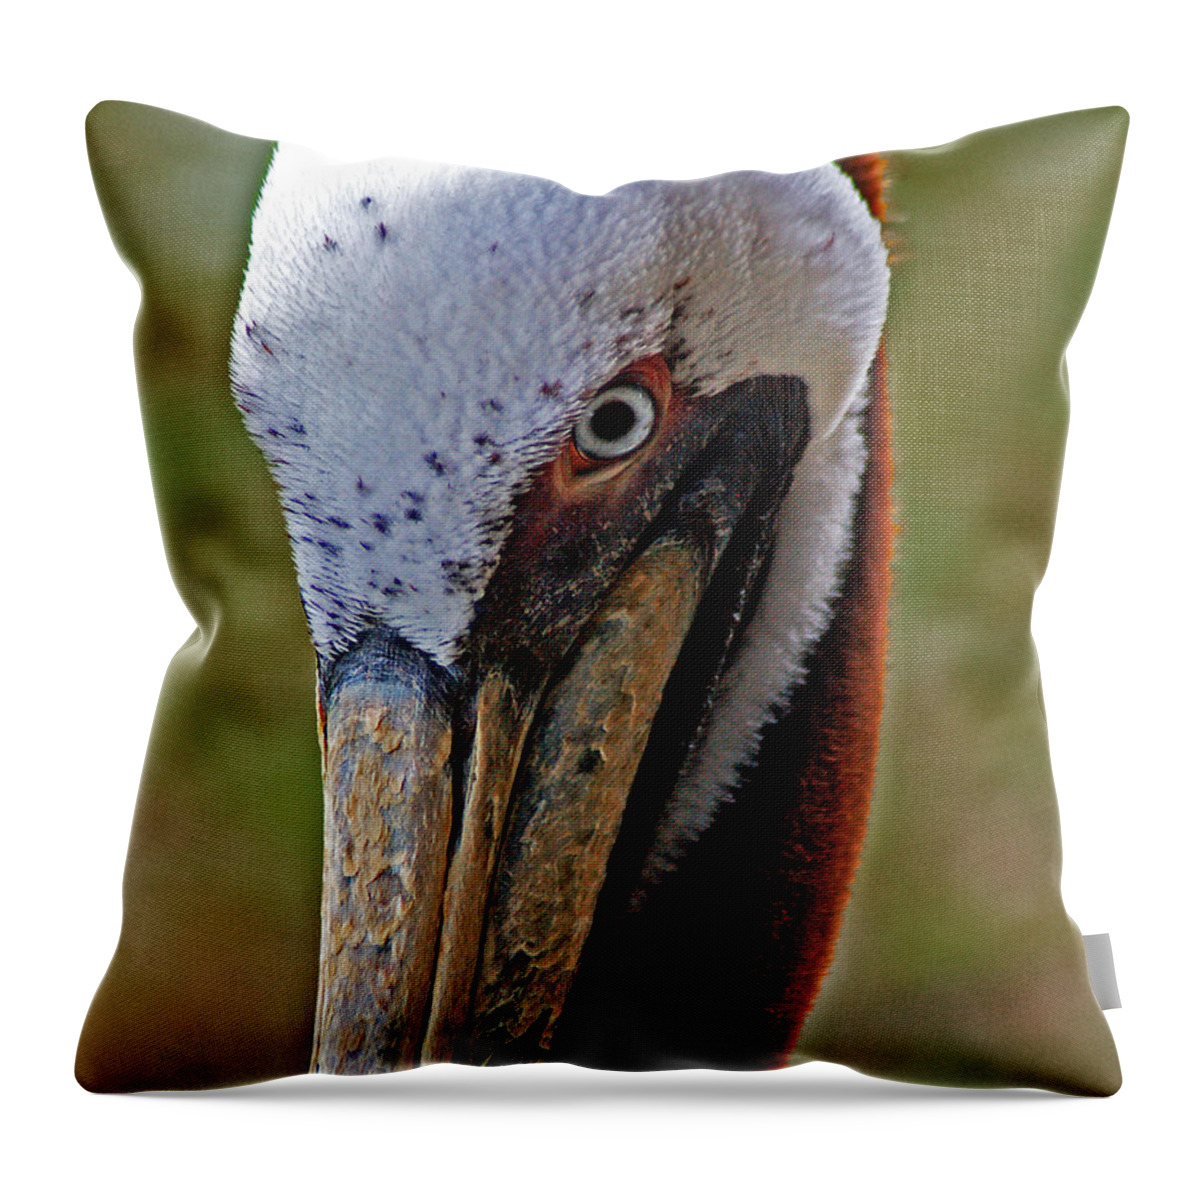 Pelican Throw Pillow featuring the painting Pelican Head by Michael Thomas